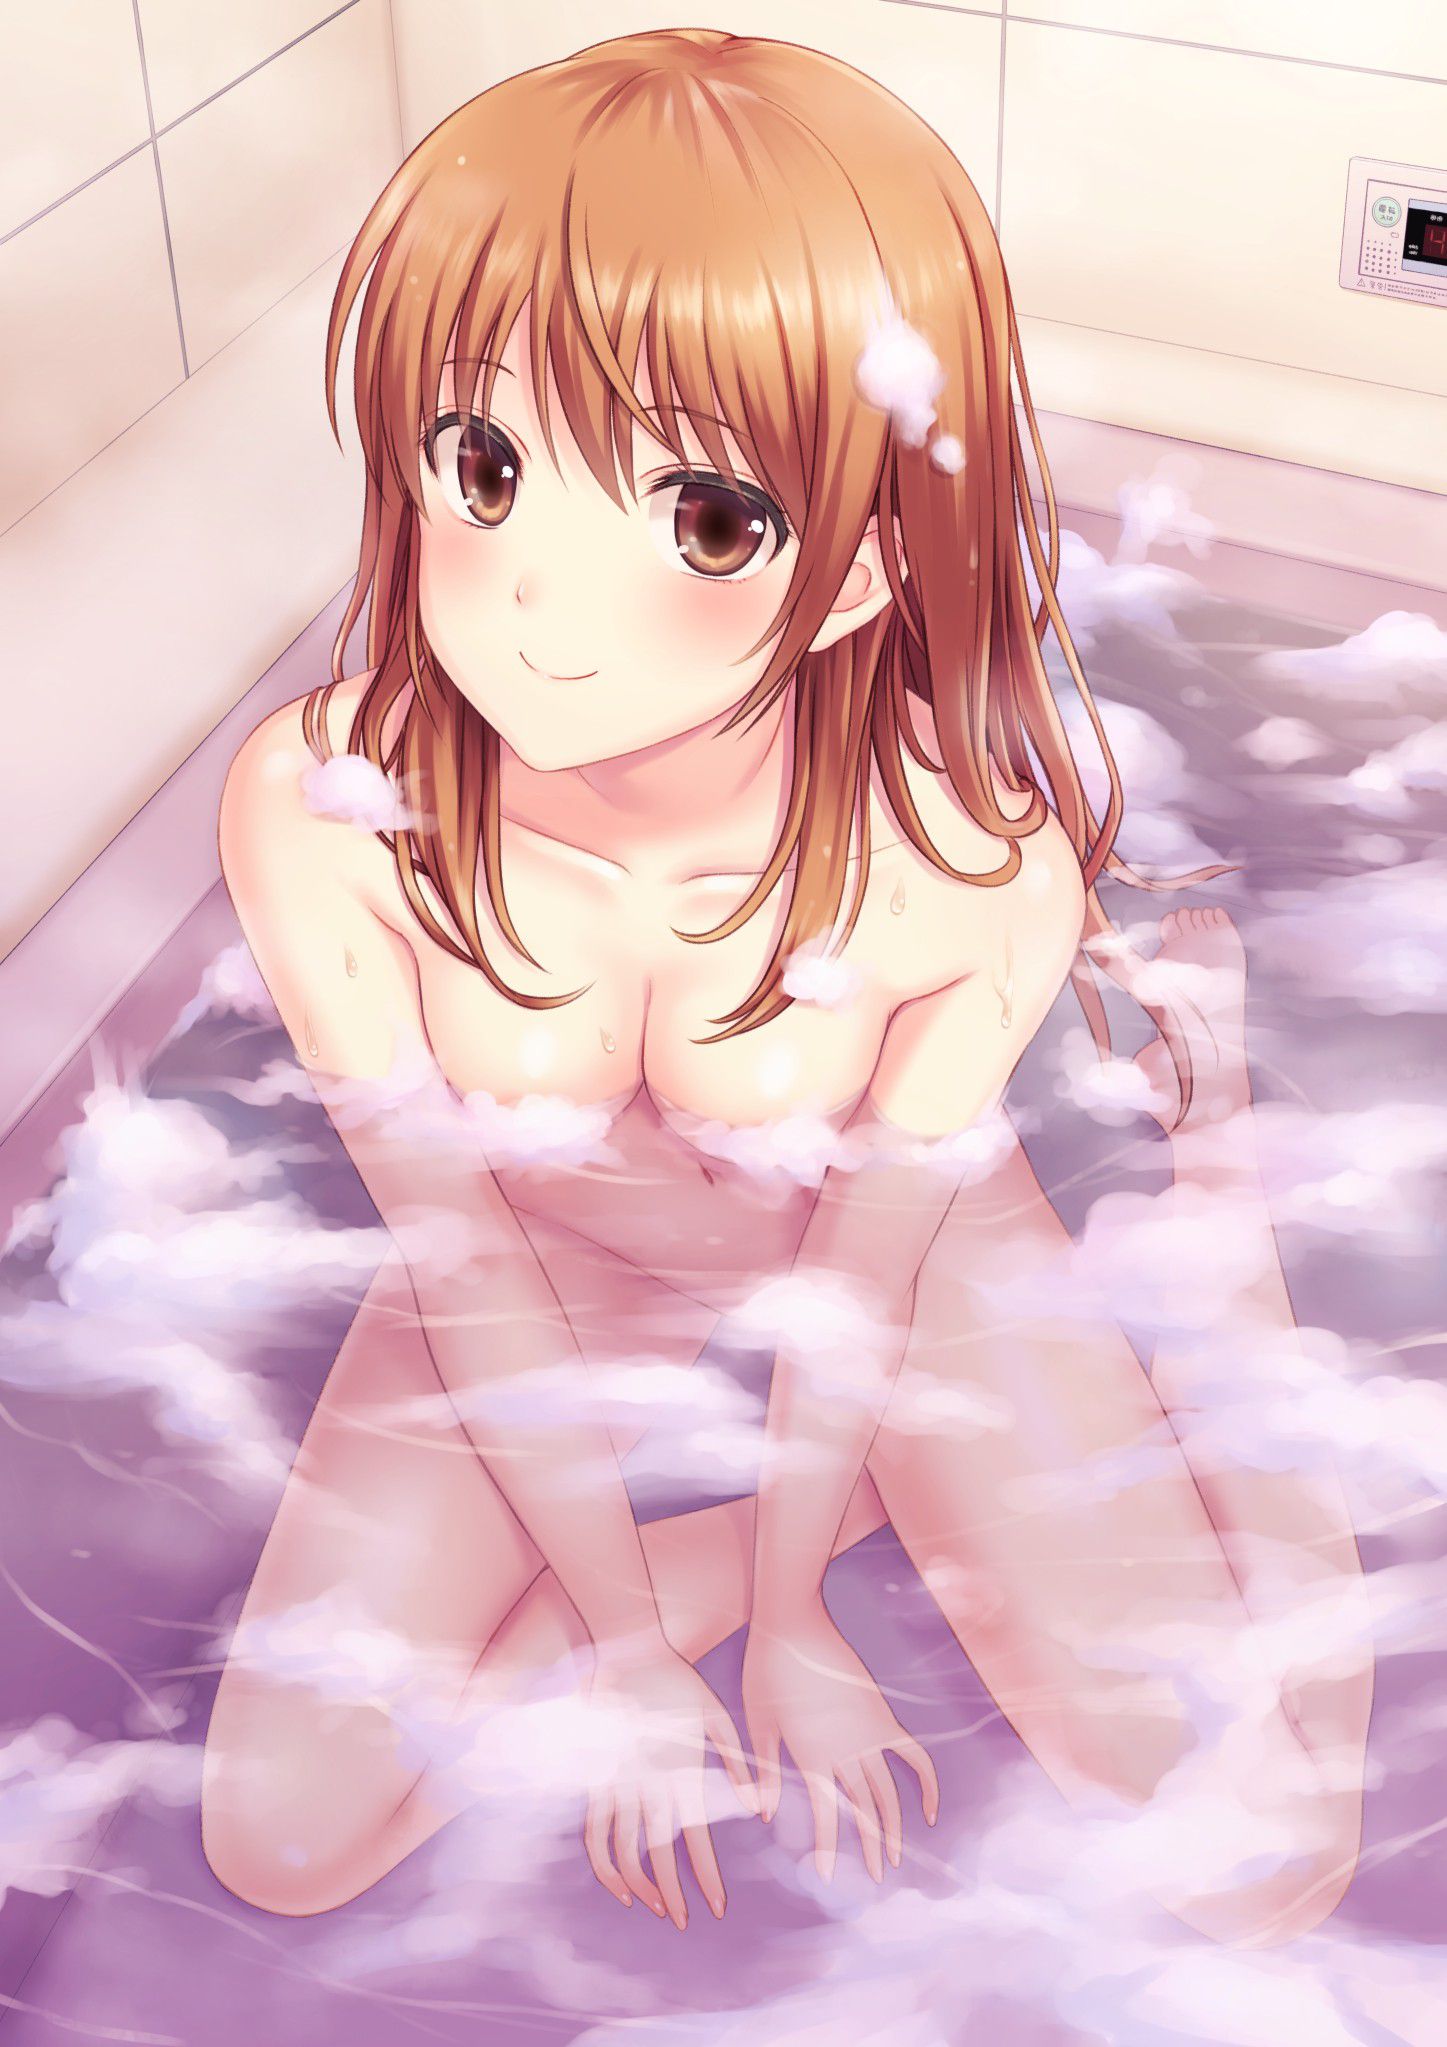 [Secondary] want to see pictures of the girl in the bath! 7 19